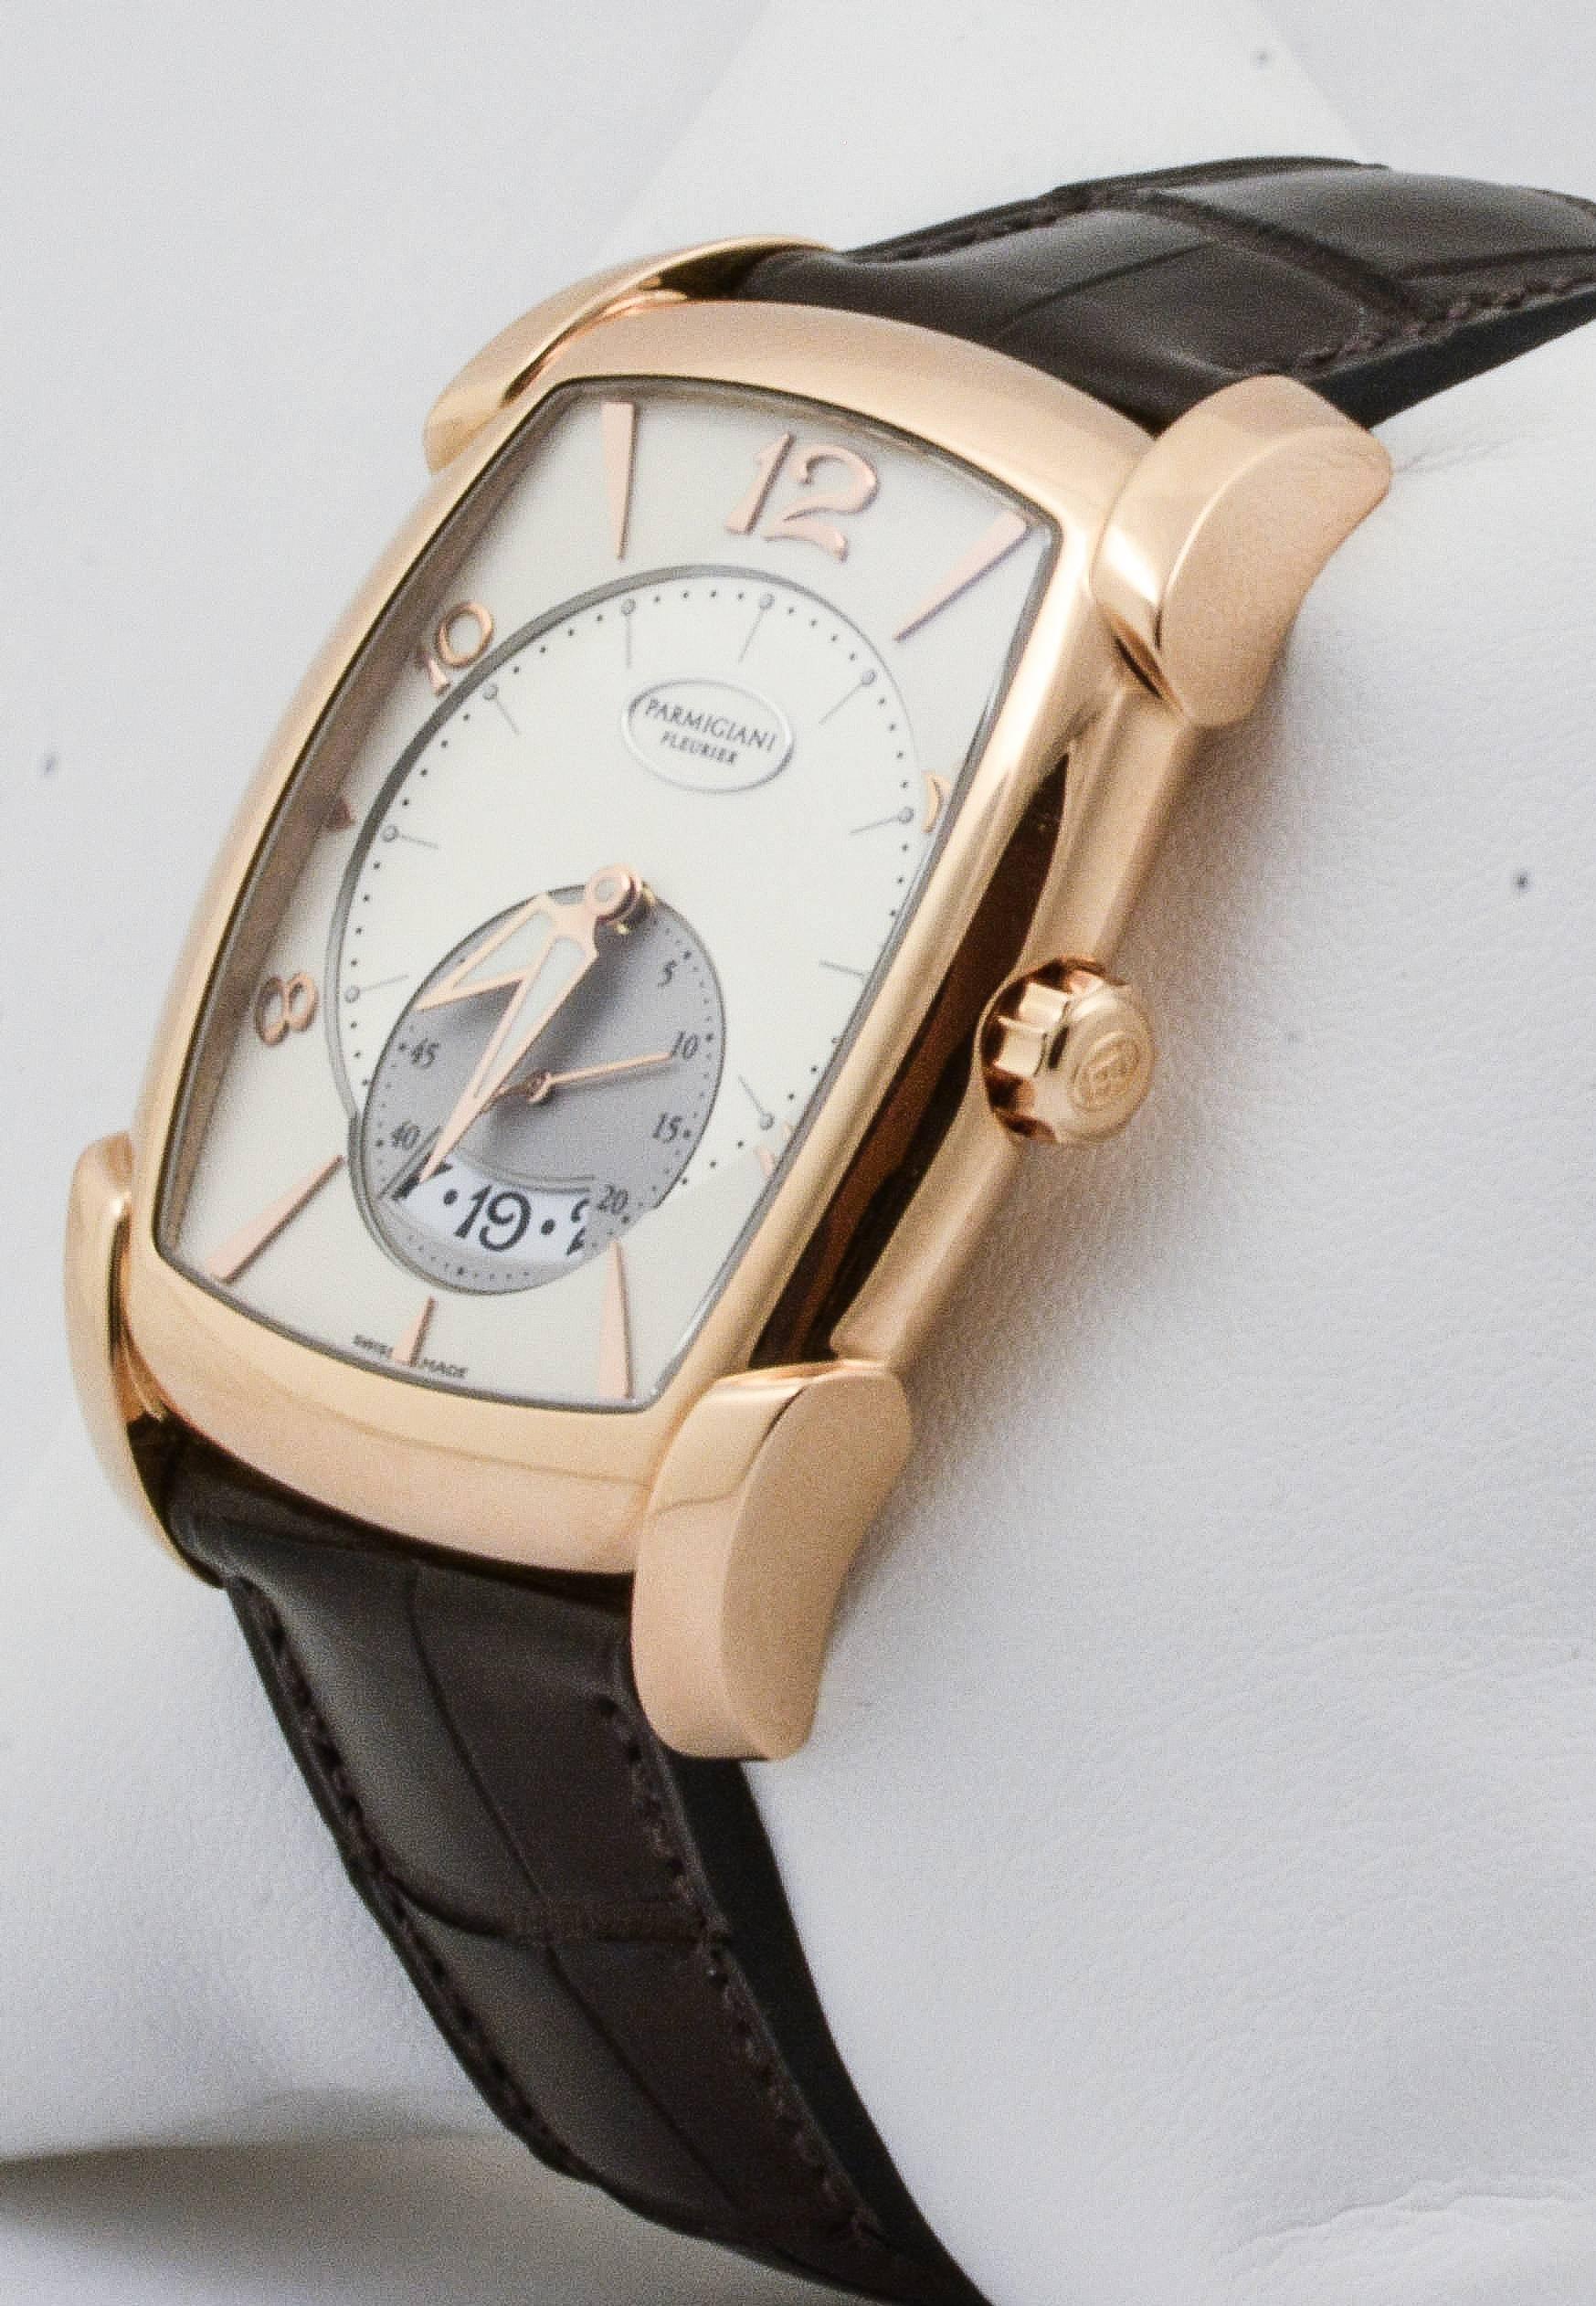 18kt rose gold creates a stunning base for this certified pre-owned Parmigiani Kalpa watch. With a unique rectangular shape, this watch measures 37x44mm in size. It comes with an ivory dial, Arabic and dial index markers, a fashionable alligator